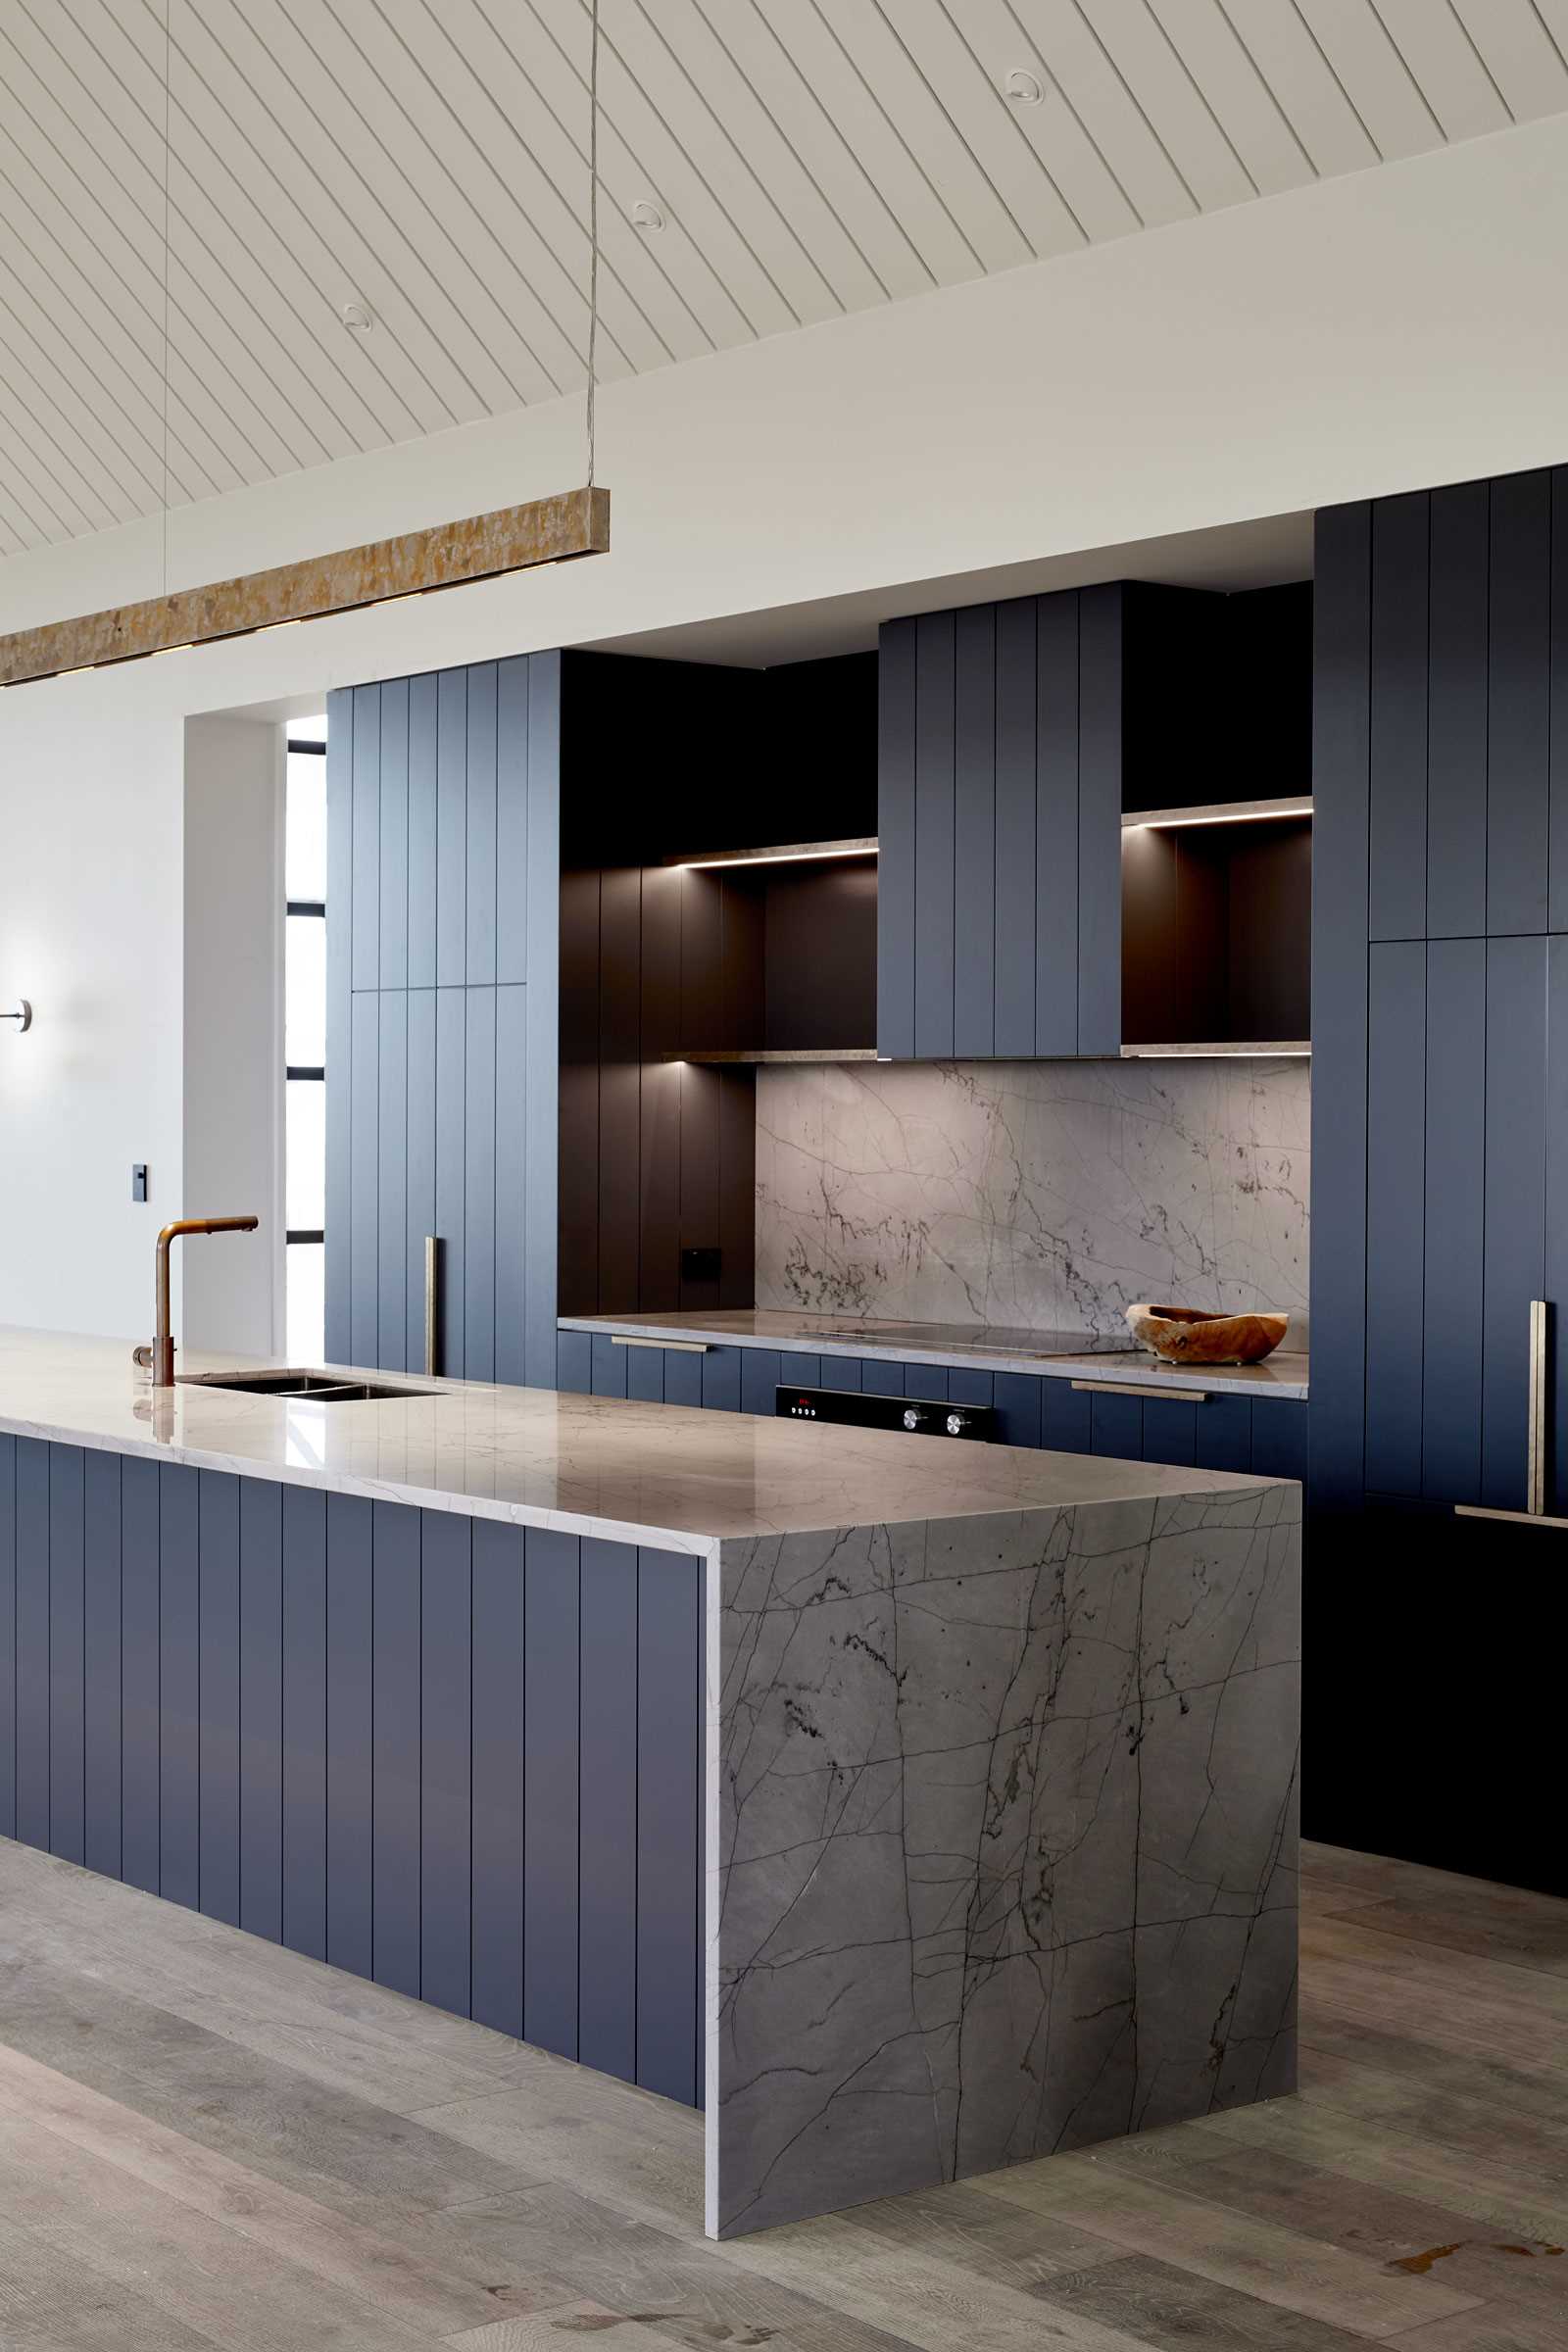 A modern kitchen has deep blue cabinetry with integrated appliances and a large island.